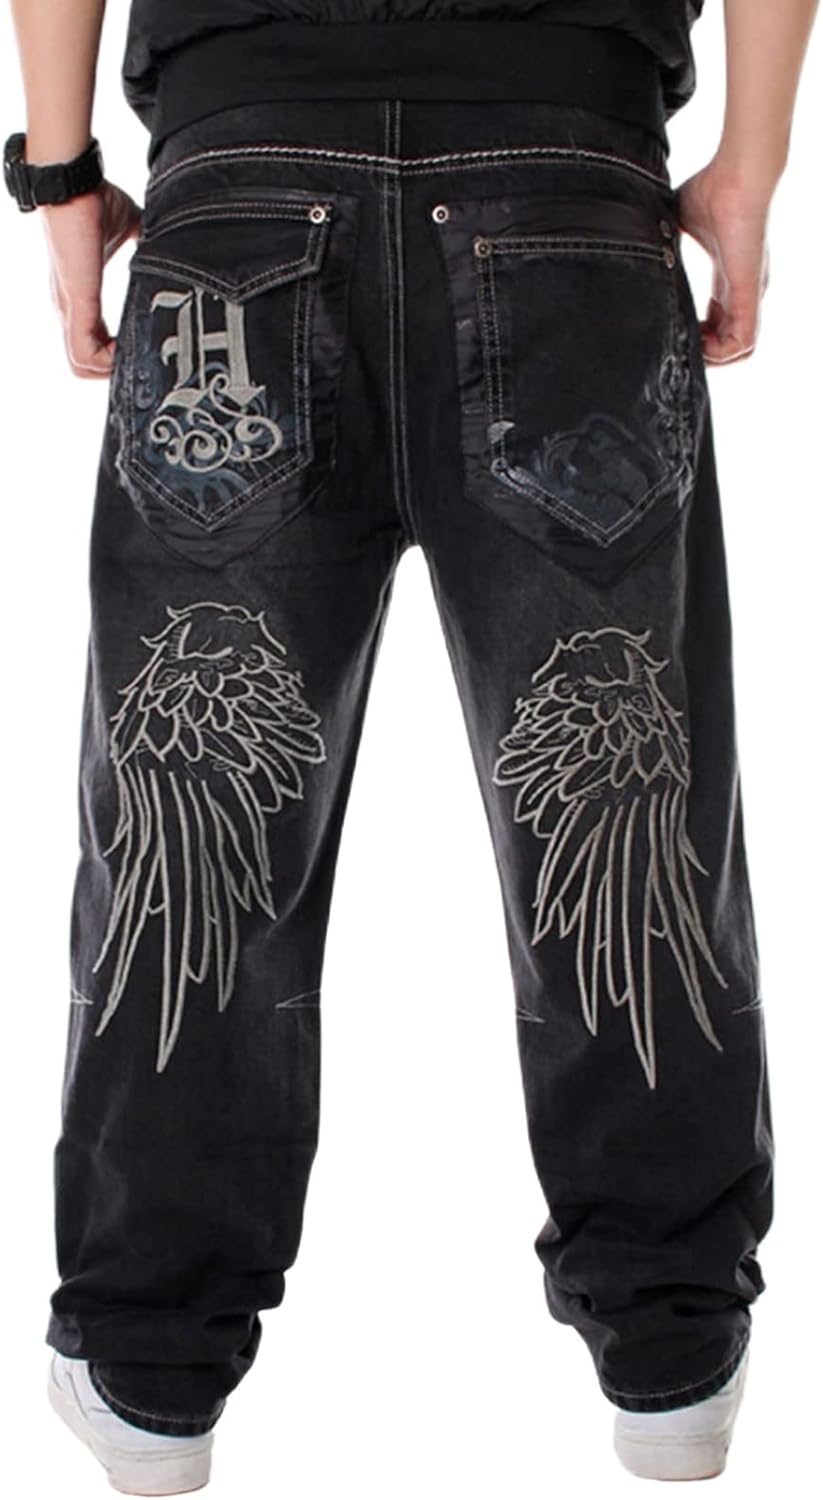 Mens Casual Baggy Jeans WholeSale - Price List, Bulk Buy at